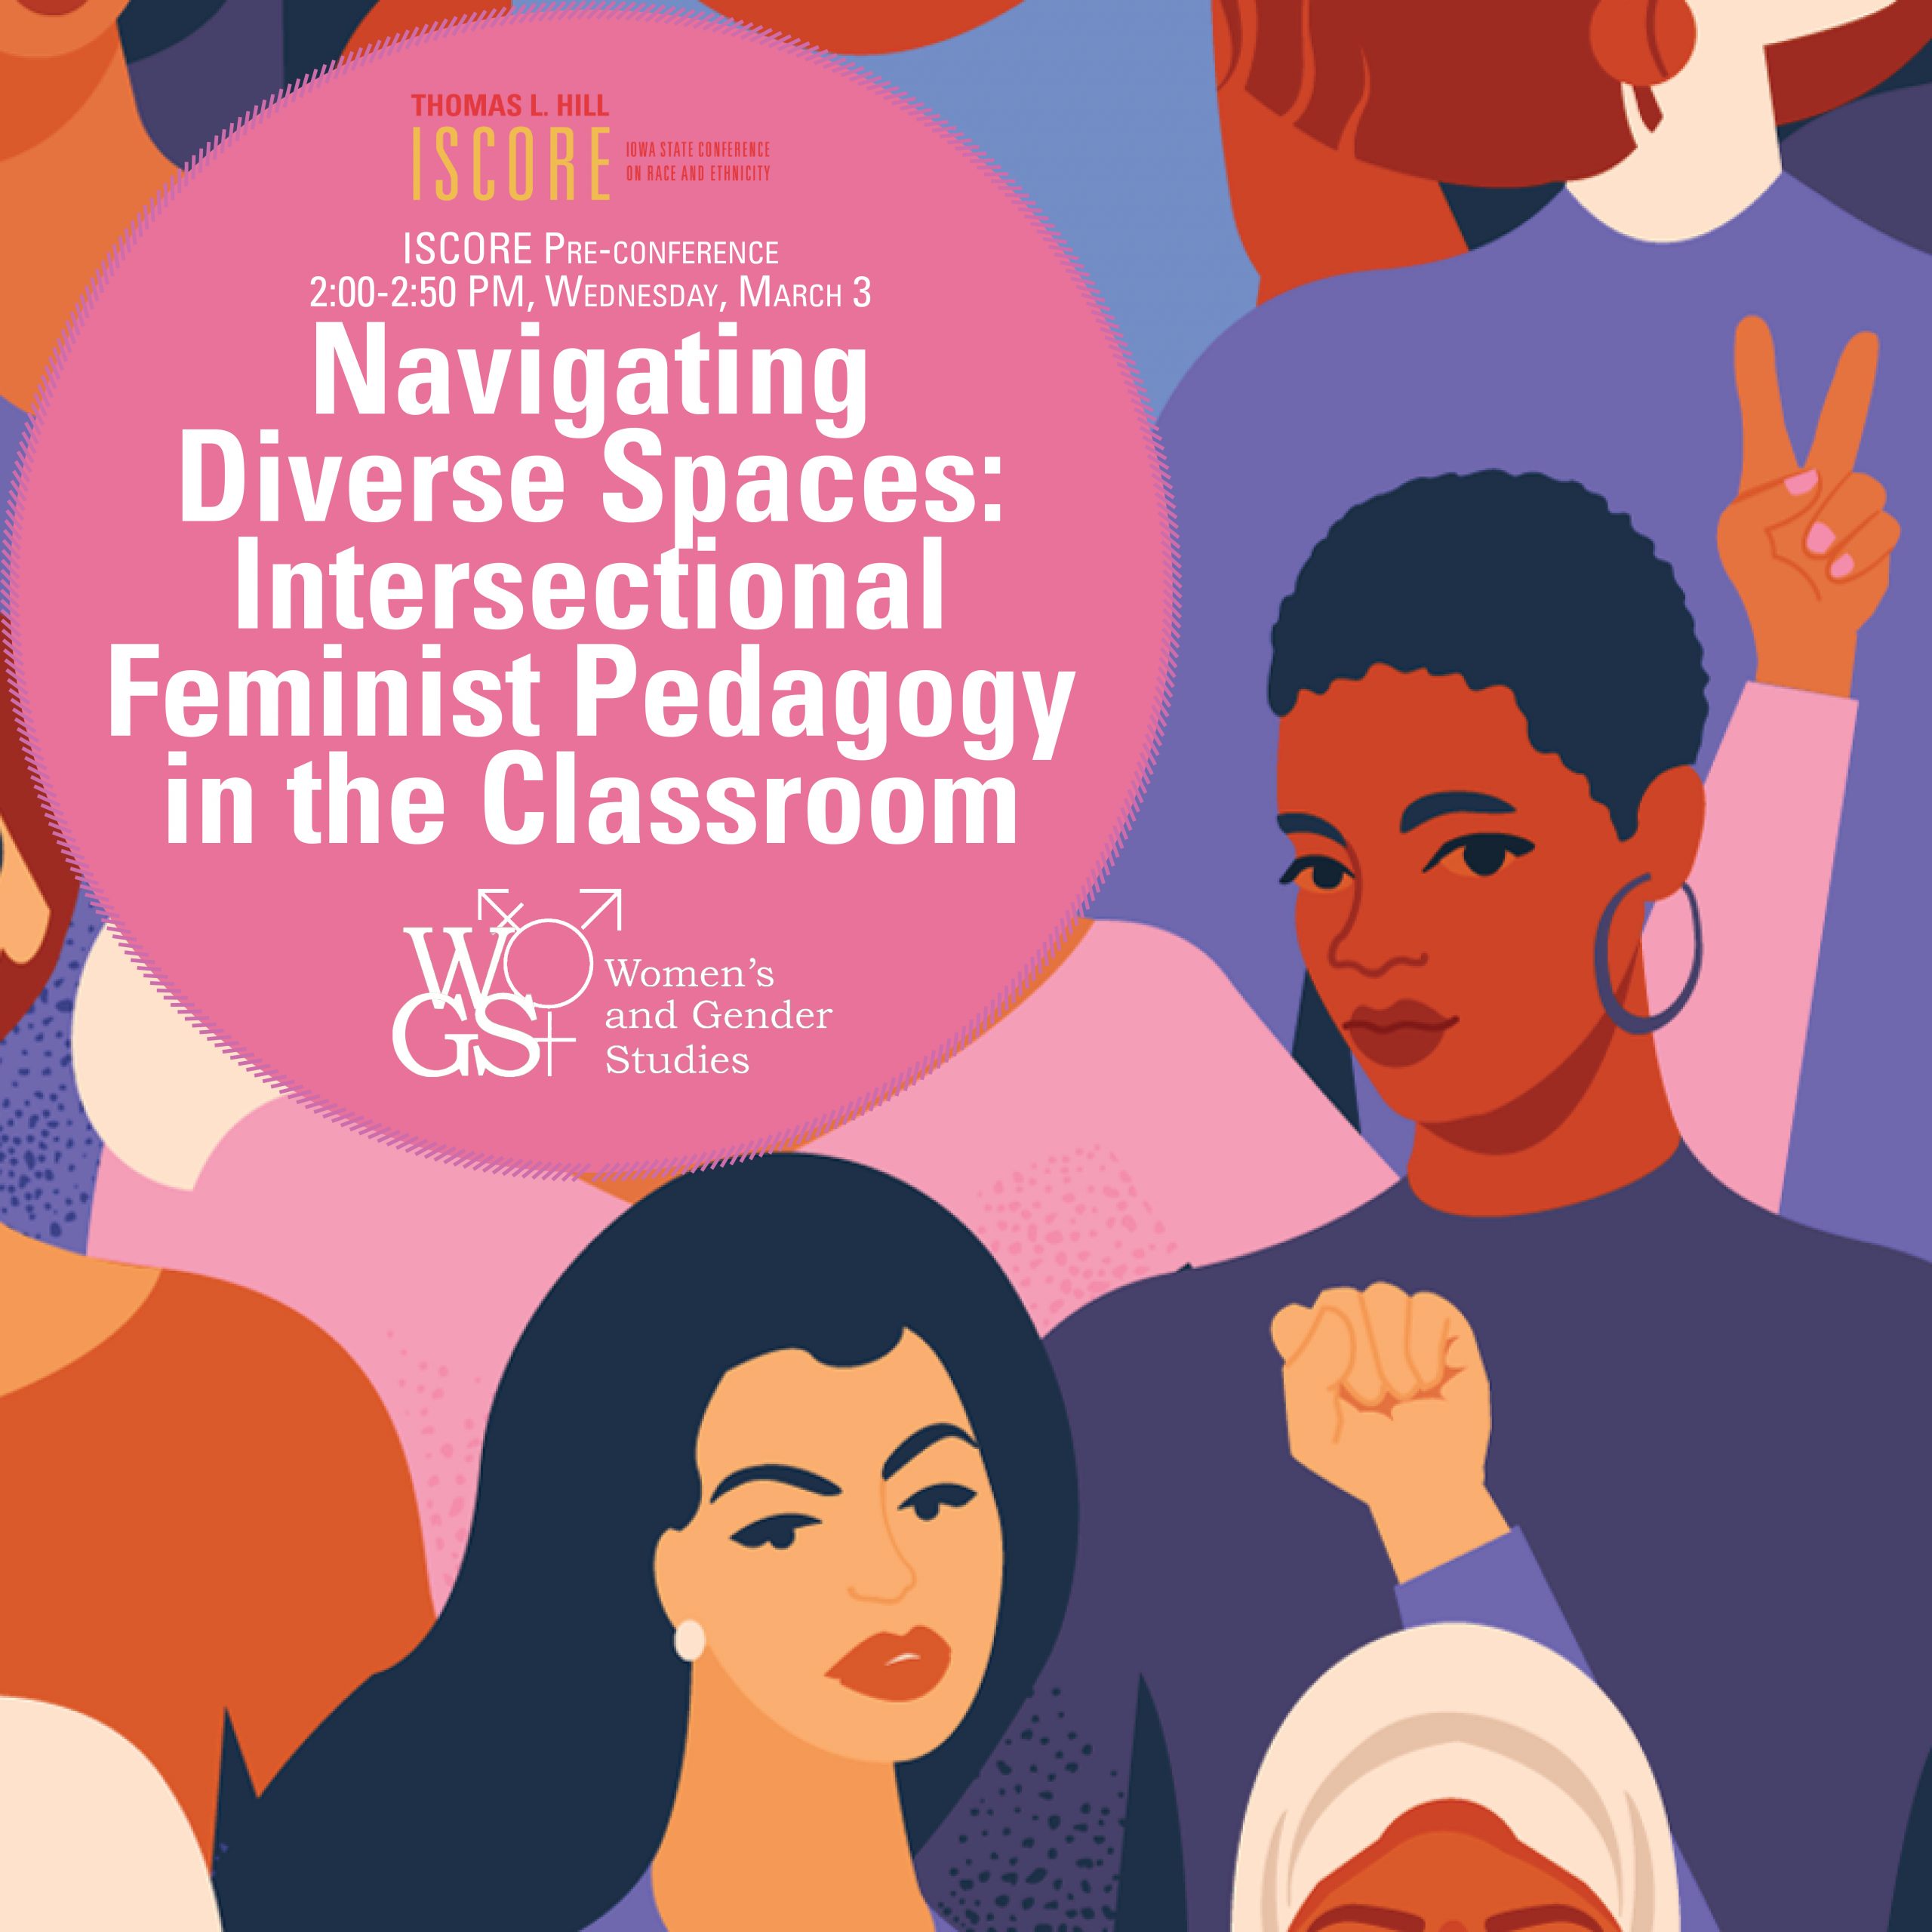 ISCORE/WGS panel "Navigating Diverse Spaces: Intersectional Feminist Pedagogy in the Classroom"